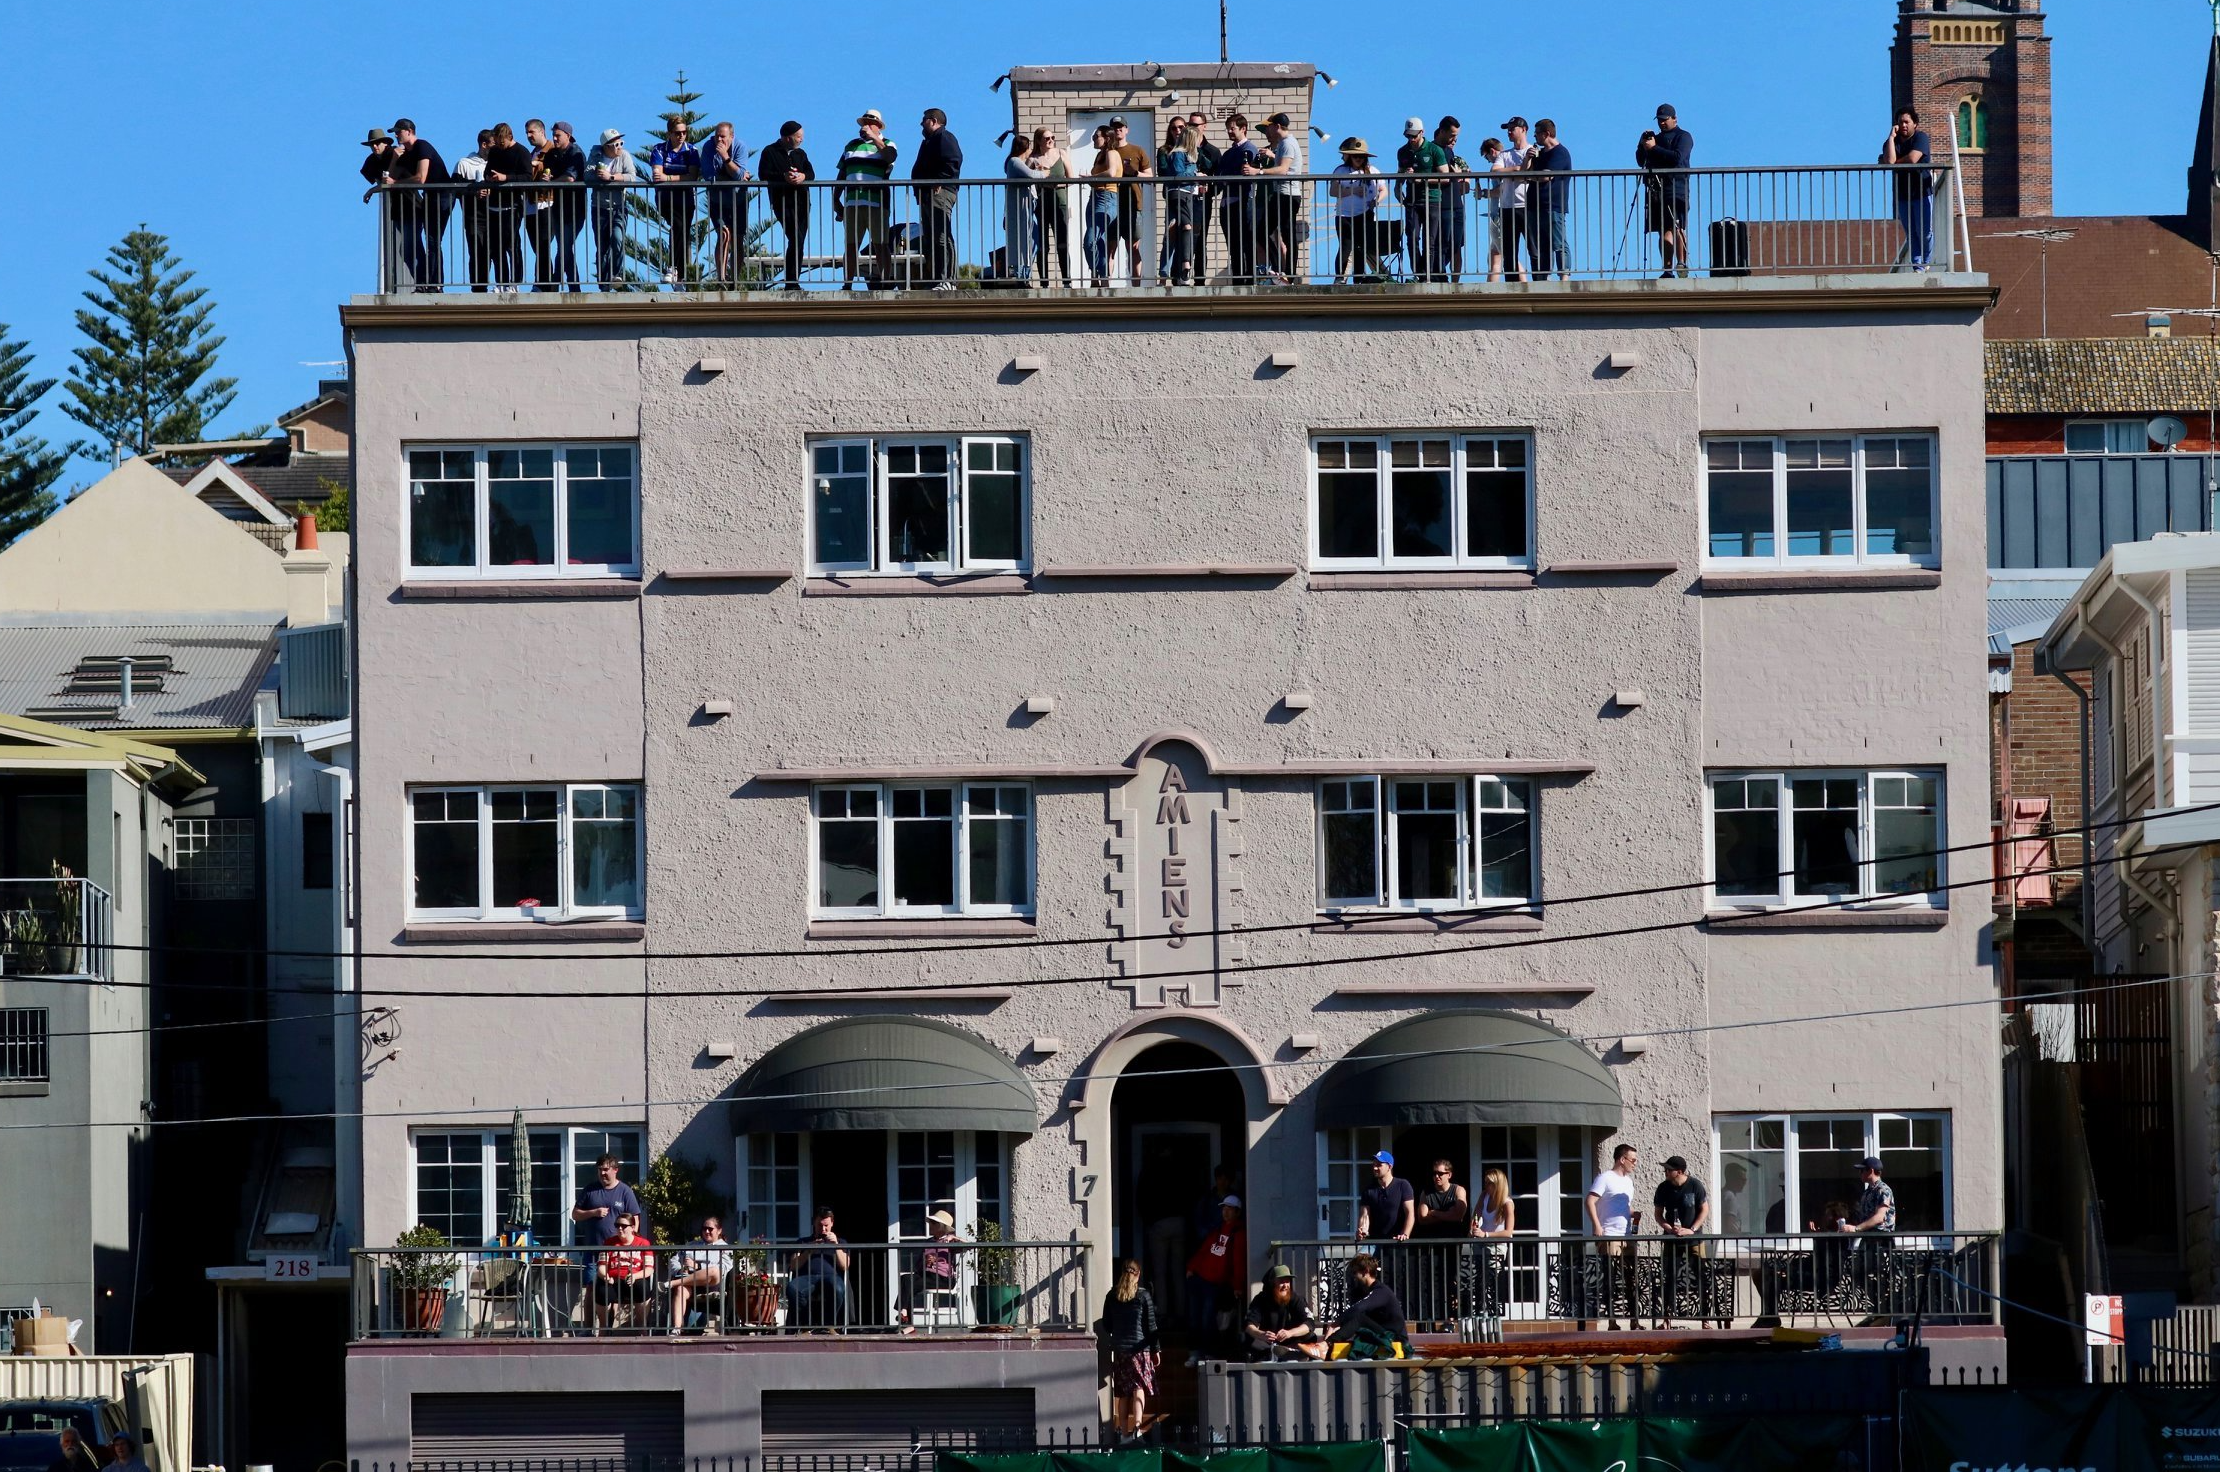 Spectators pack the balconies of nearby apartments